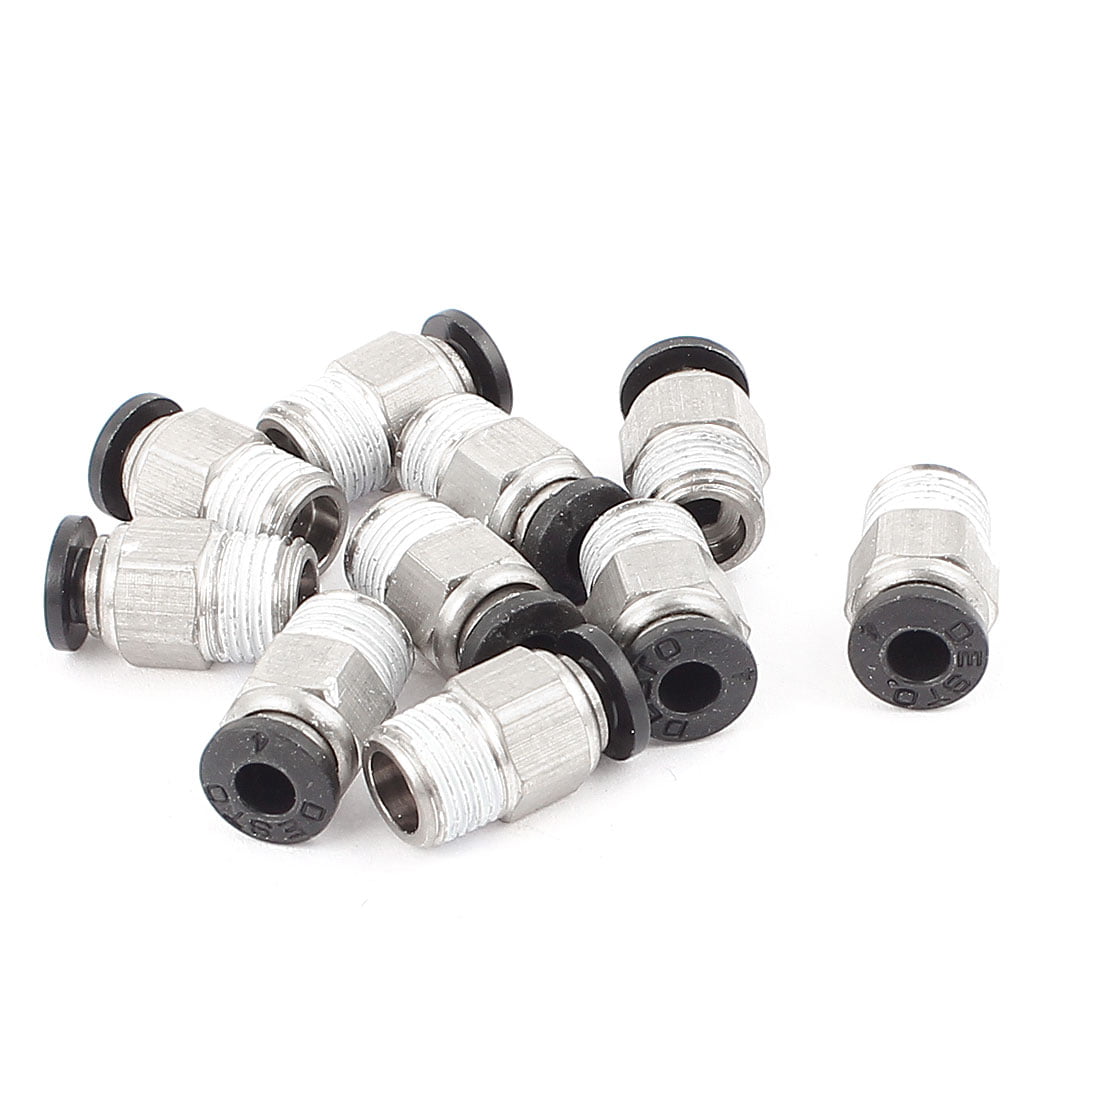 6mm for Industry Automatic 10Pcs 3/8 PT Male Push in Joint Pneumatic Connector Quick Fittings Thread Dia